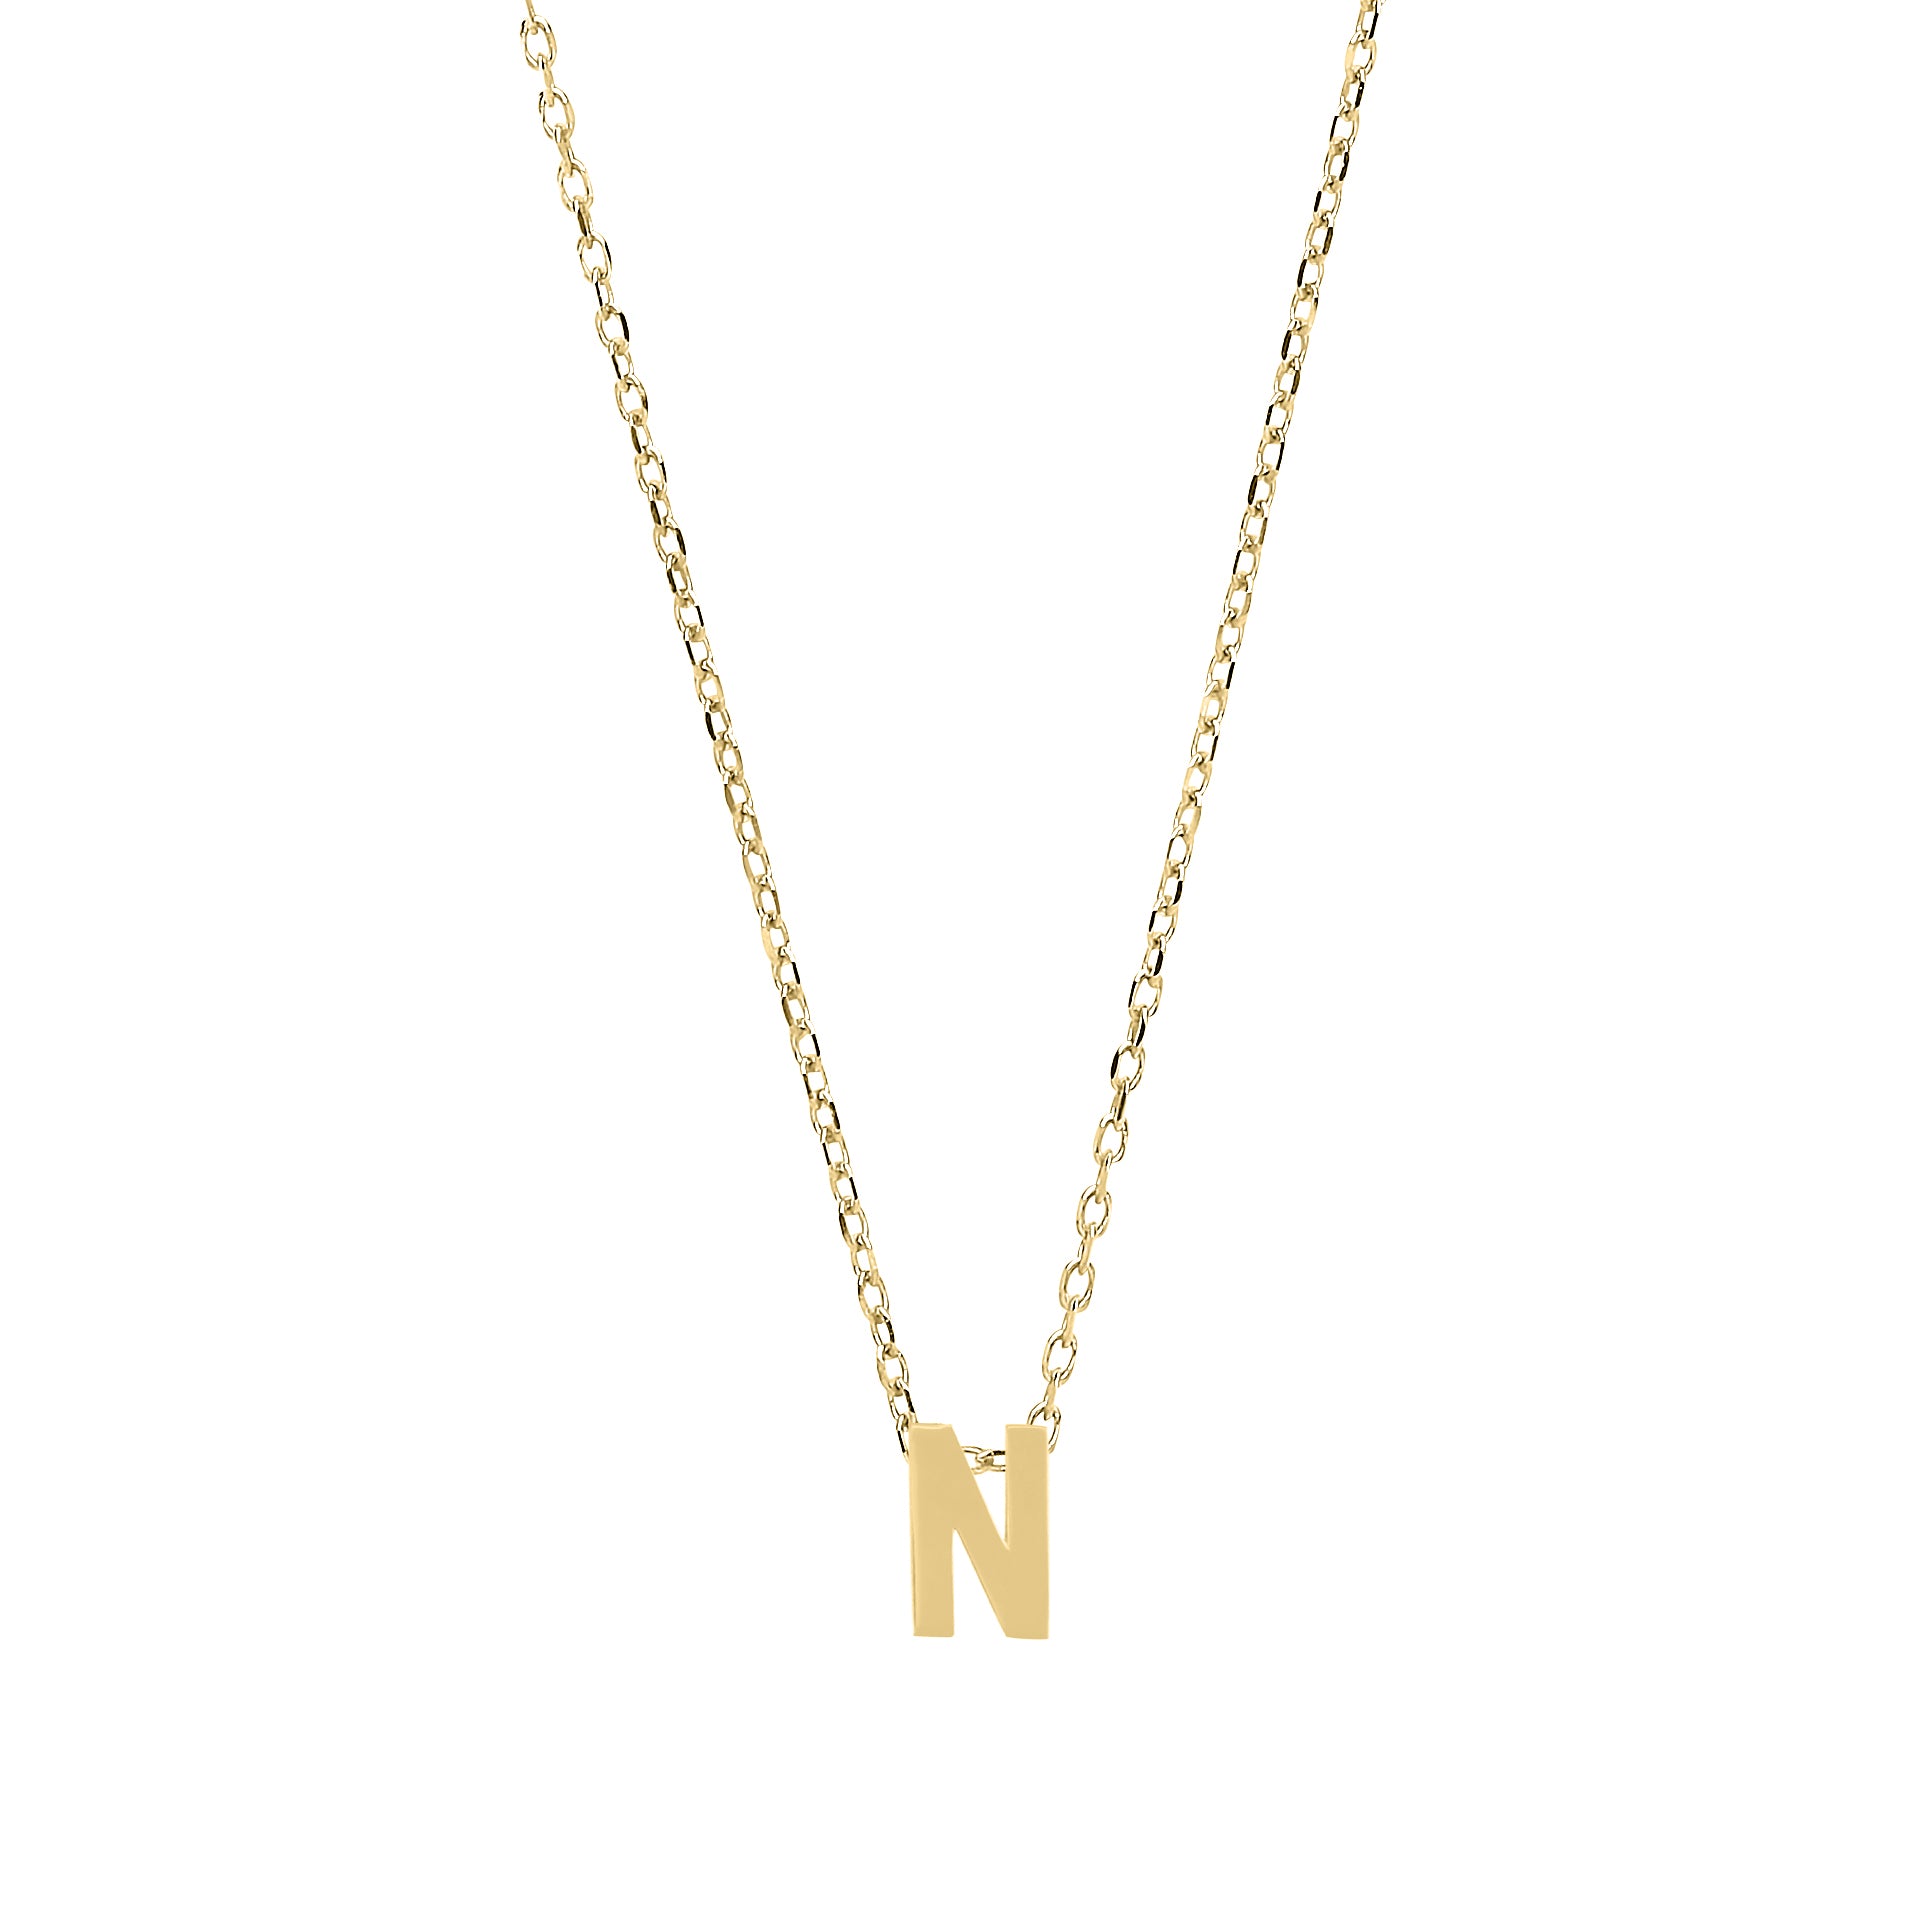 9ct Gold  Letter N Initial Pendant Necklace 17 inch 43cm - G9P6032N